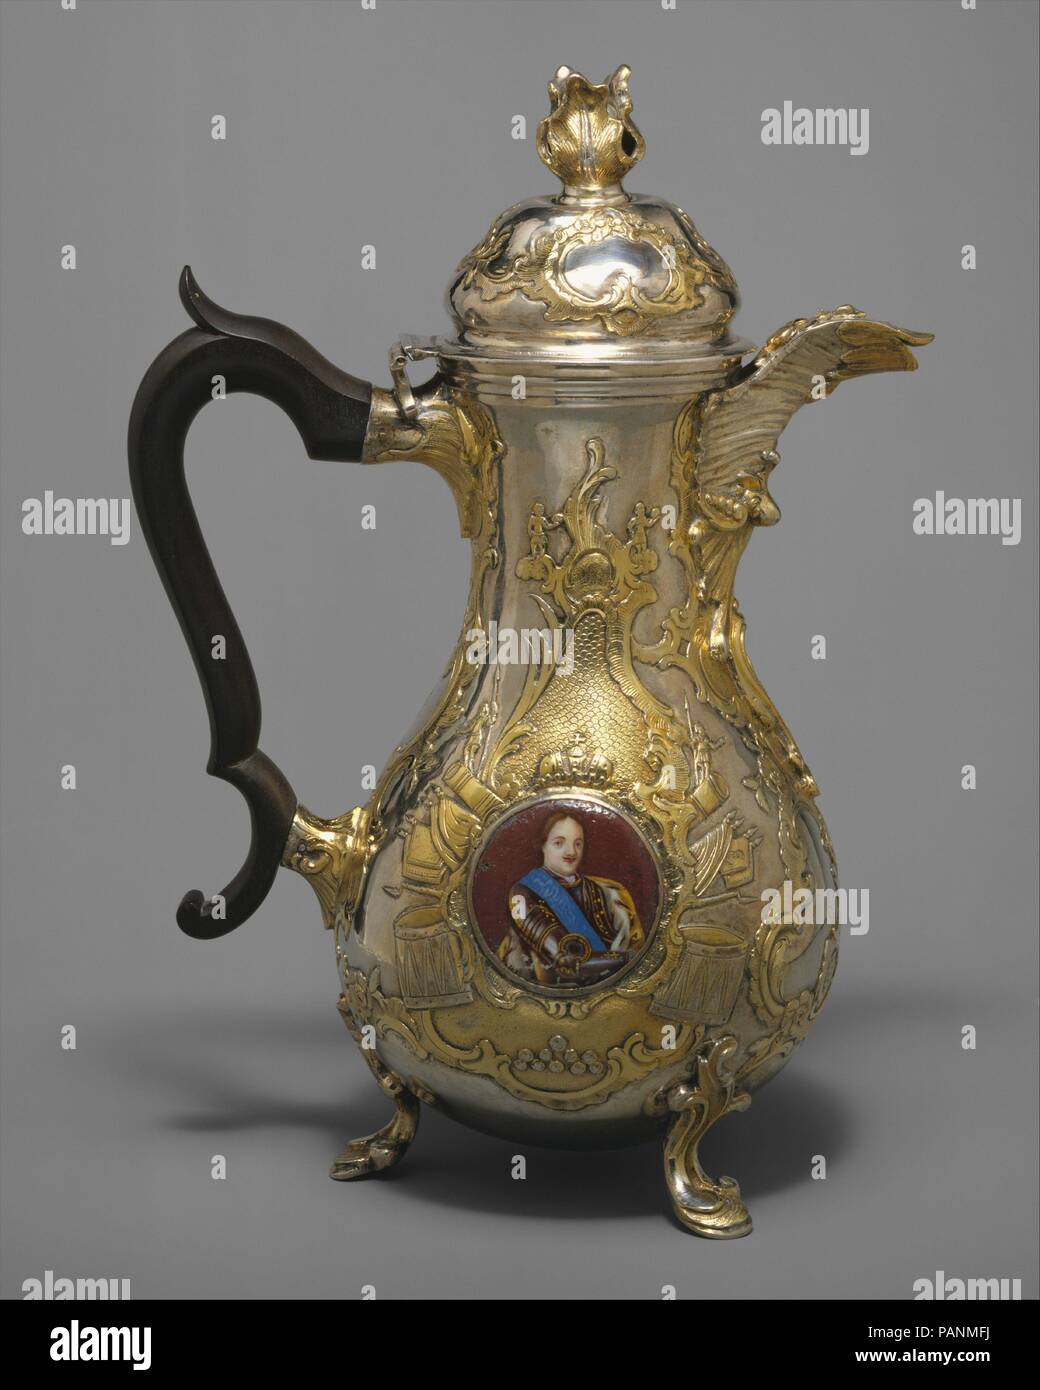 Coffeepot (part of a set). Artist: After a painting by Pietro Rotari (Italian, Verona 1707-1762 St. Petersburg). Culture: Russian, St. Petersburg. Dimensions: Height: 10 1/4 in. (26 cm). Maker: Johan Henrik Blom (Finnish, master 1766, died 1805). Date: 1773.  The service (47.51.1-.5) is thought to have been given by Empress Catherine II to Count Pyotr Rumiantsev, governor of the Ukraine and leader of the victorious Russian forces in the war with Turkey (1768-74). Enamel portraits on the utensils depict the imperial line from Peter the Great to Catherine II to her son, later Paul I. Facing are: Stock Photo